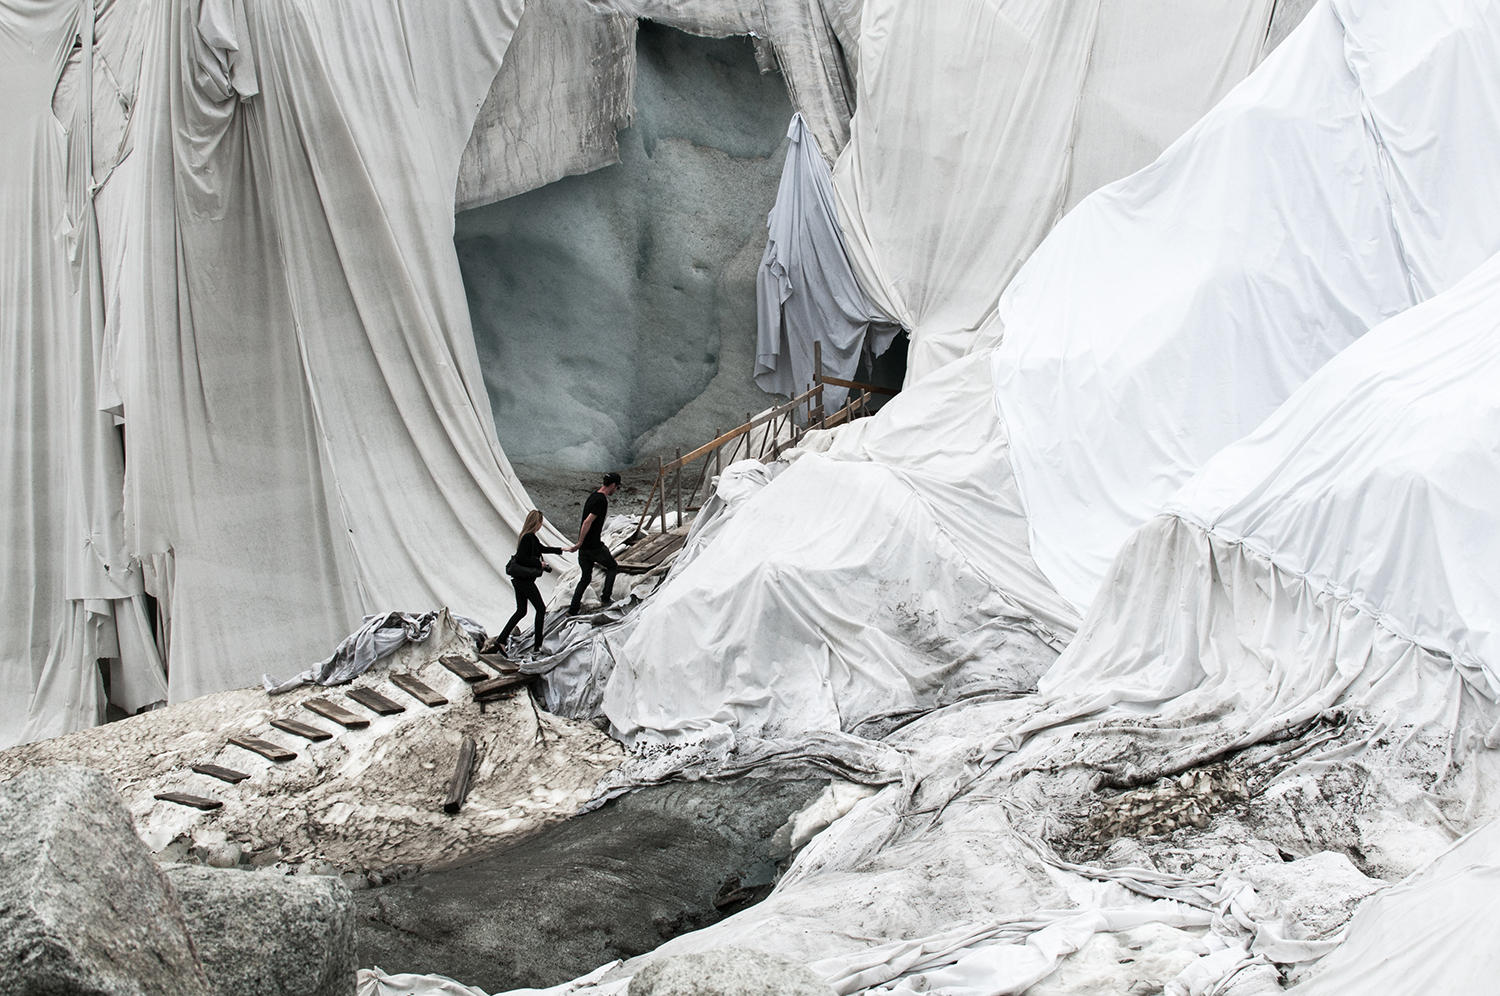 Glaciers draped with cloth, two people walk along the steps.